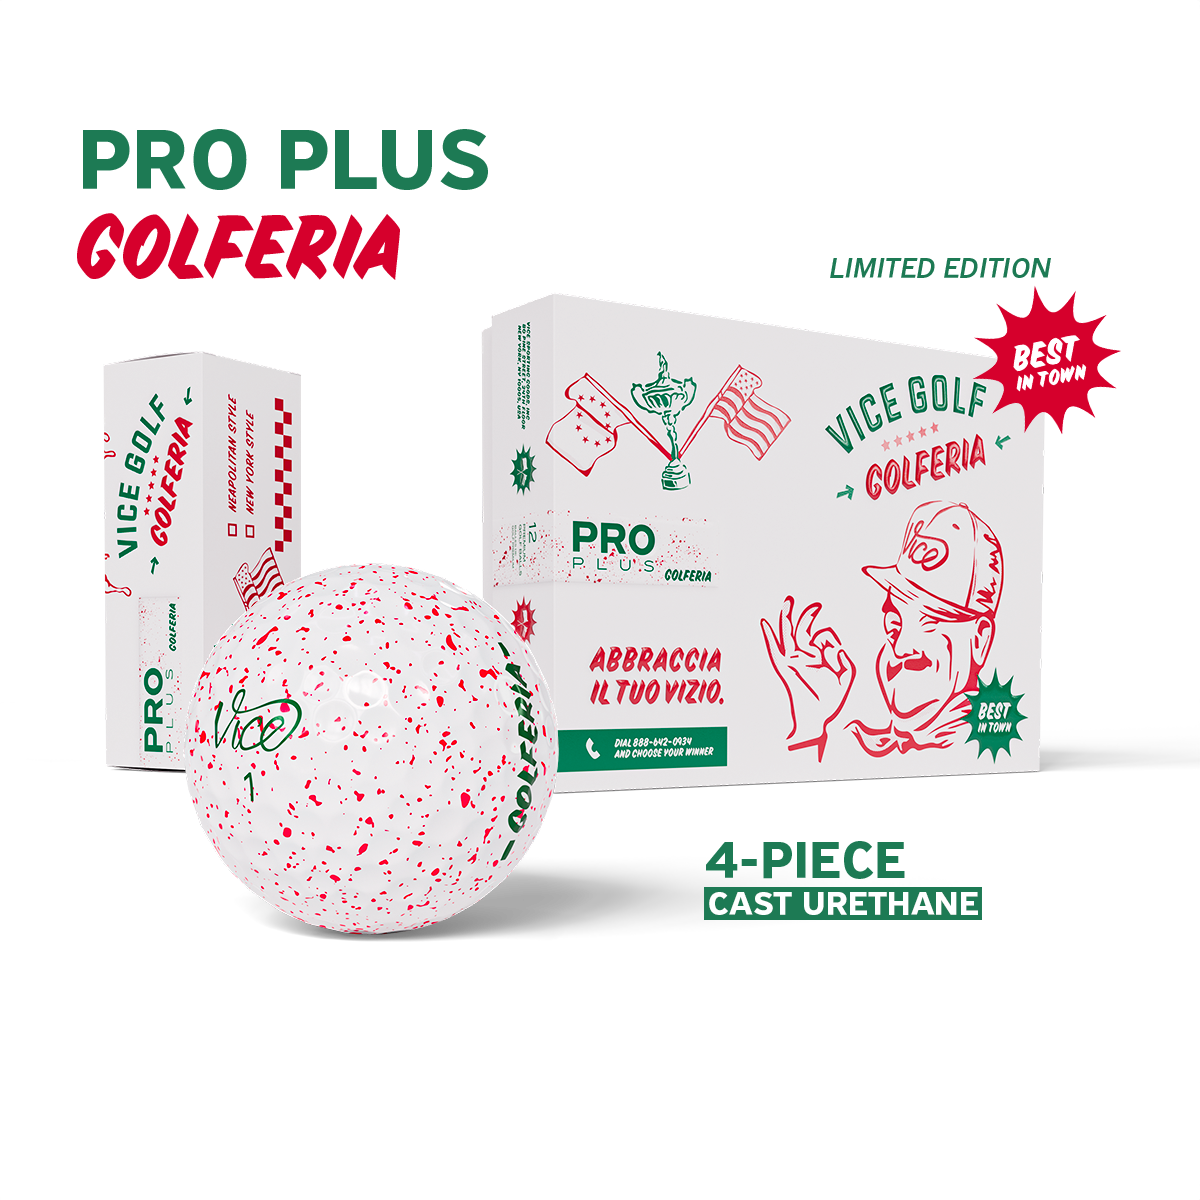 Pro Plus Lime package